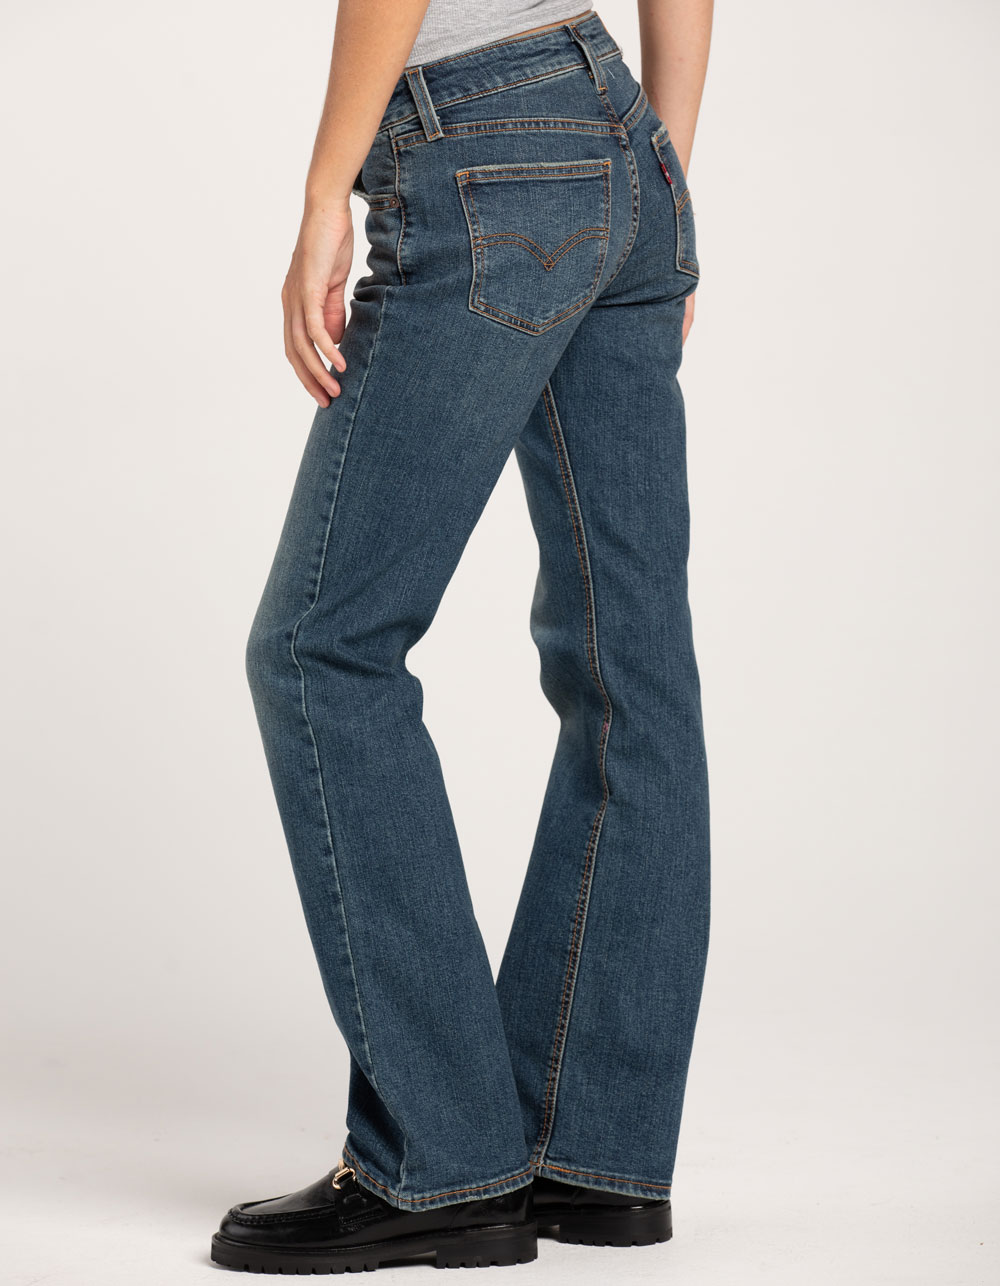 LEVI'S Superlow Bootcut Womens Jeans - Show On The Road - DARK VINTAGE ...